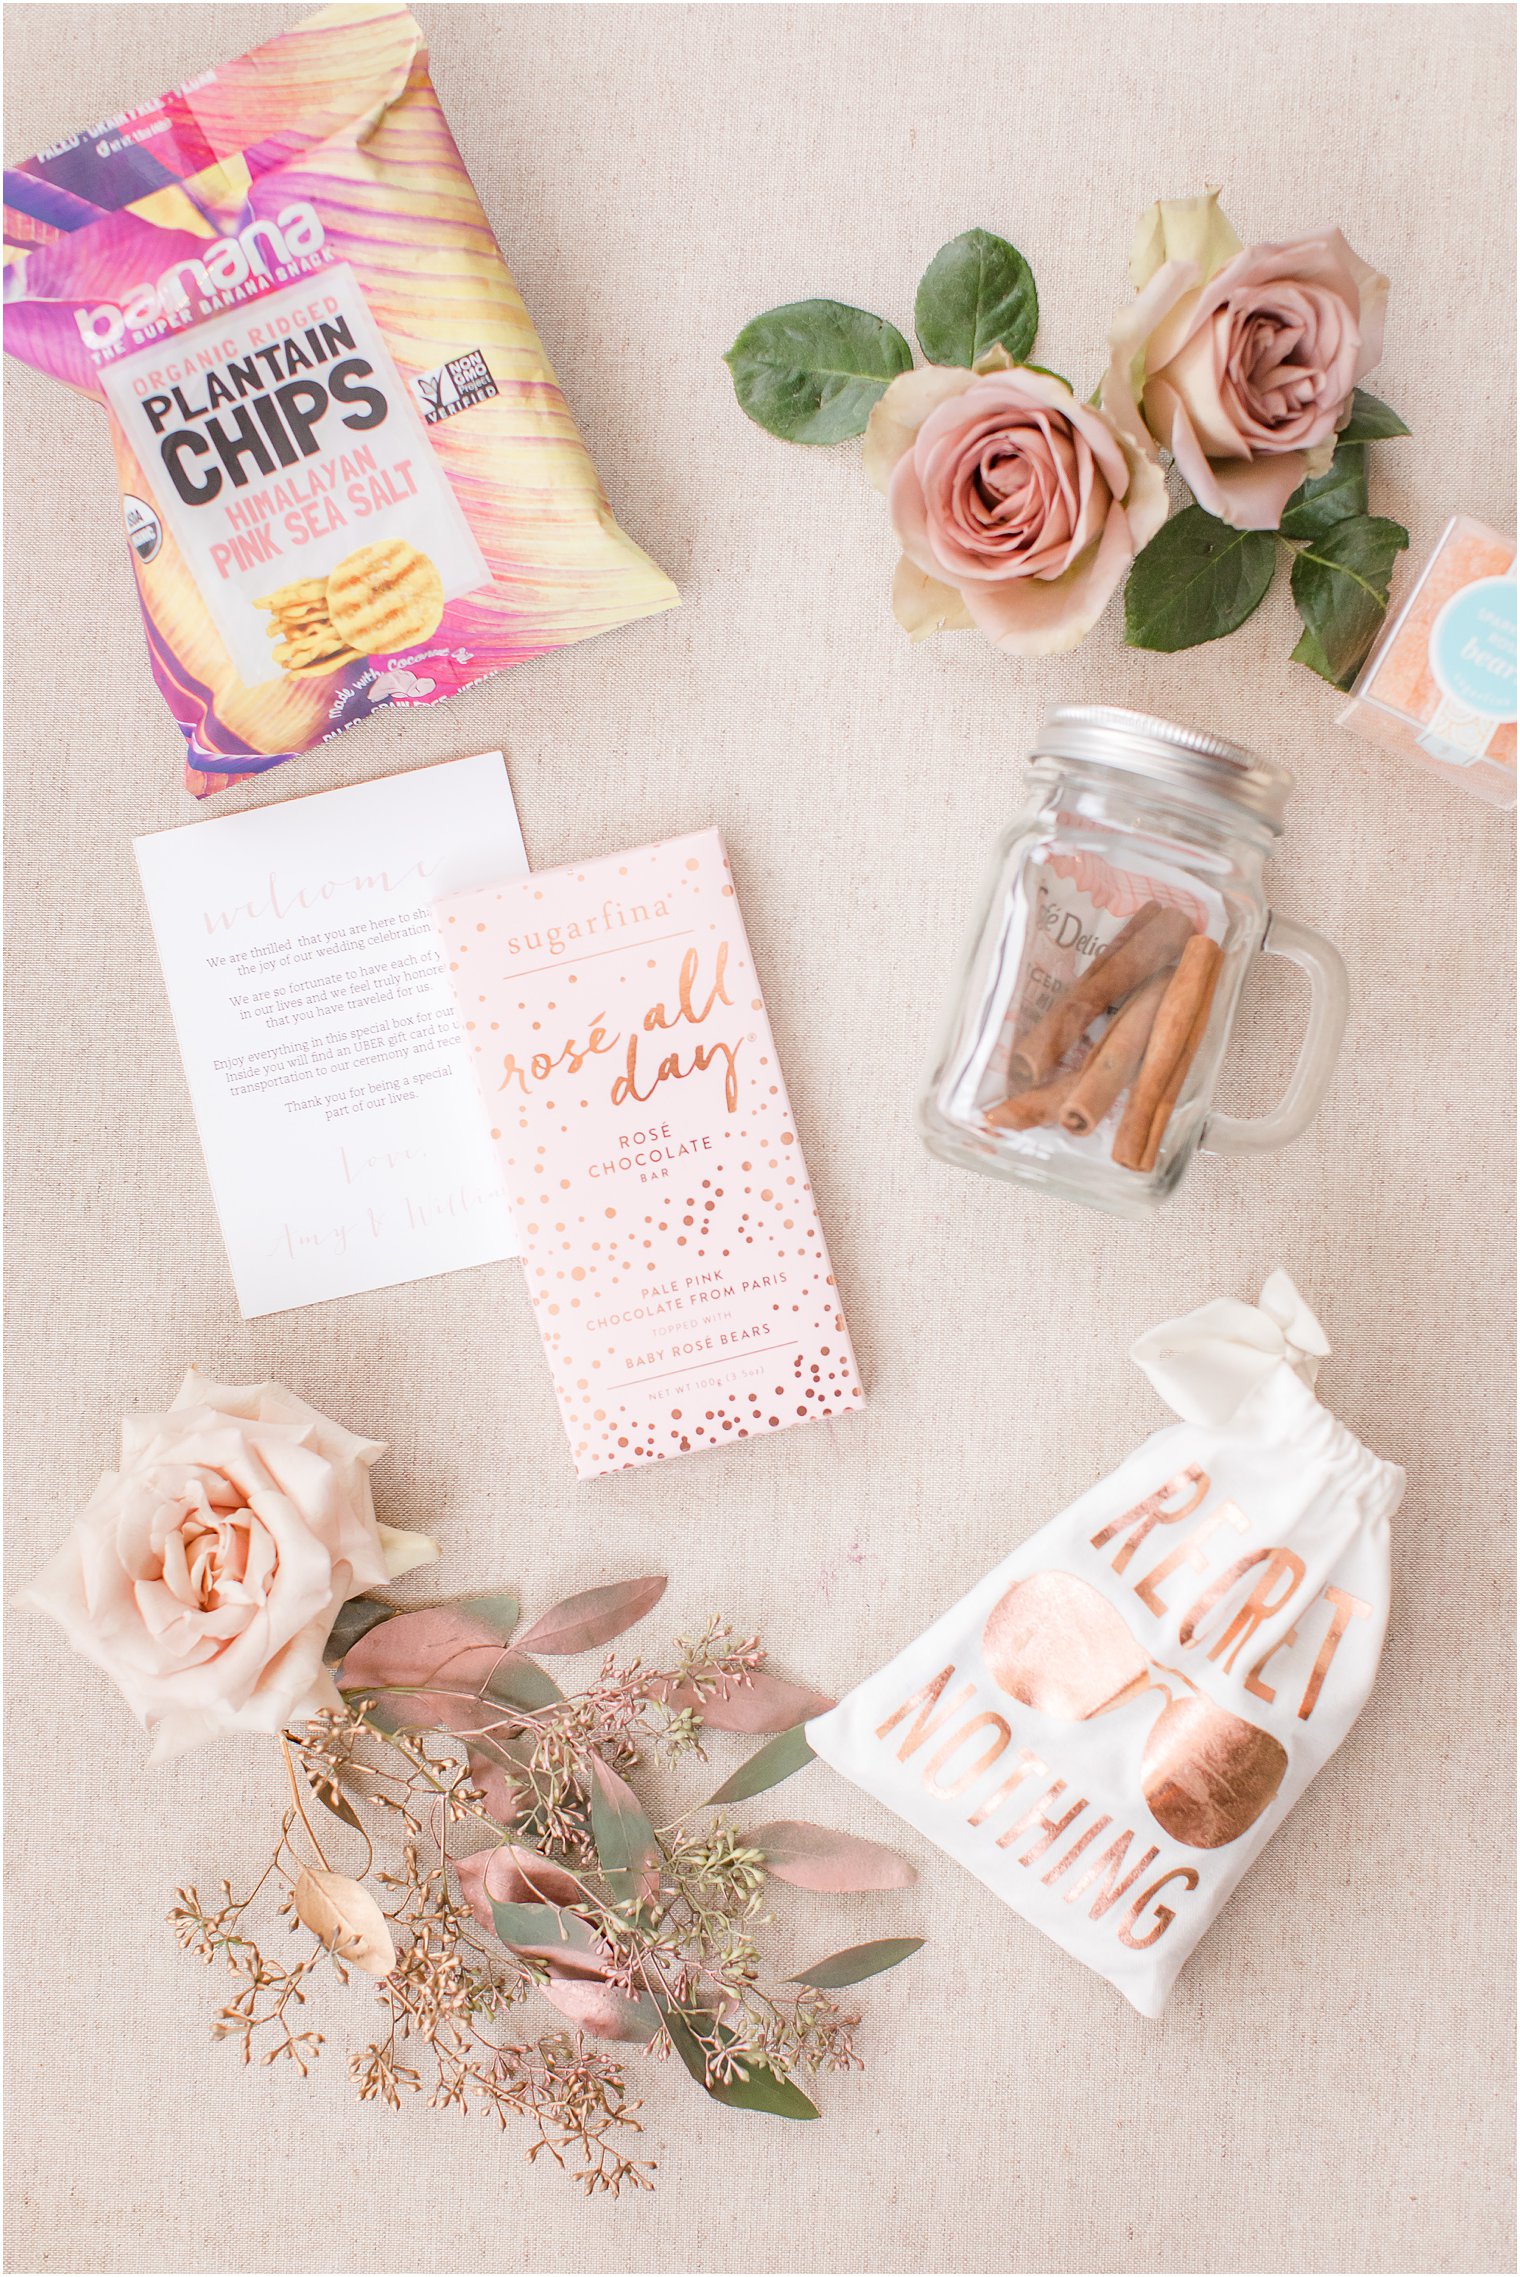 Wedding welcome bag with plantain chips, Sugarfina, and Regret Nothing bag